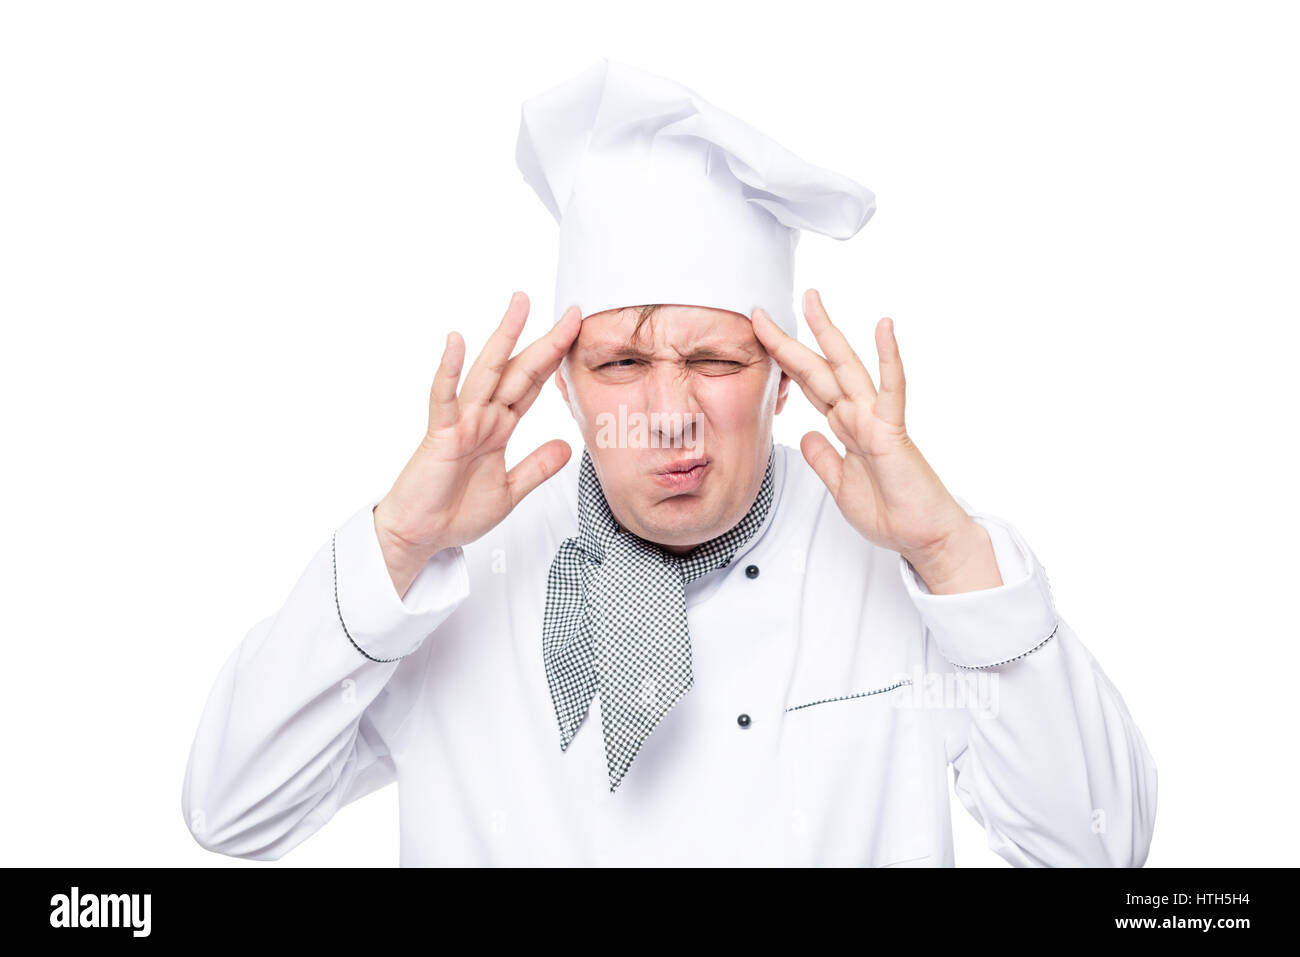 headache have overwrought chef portrait isolated on white background Stock Photo